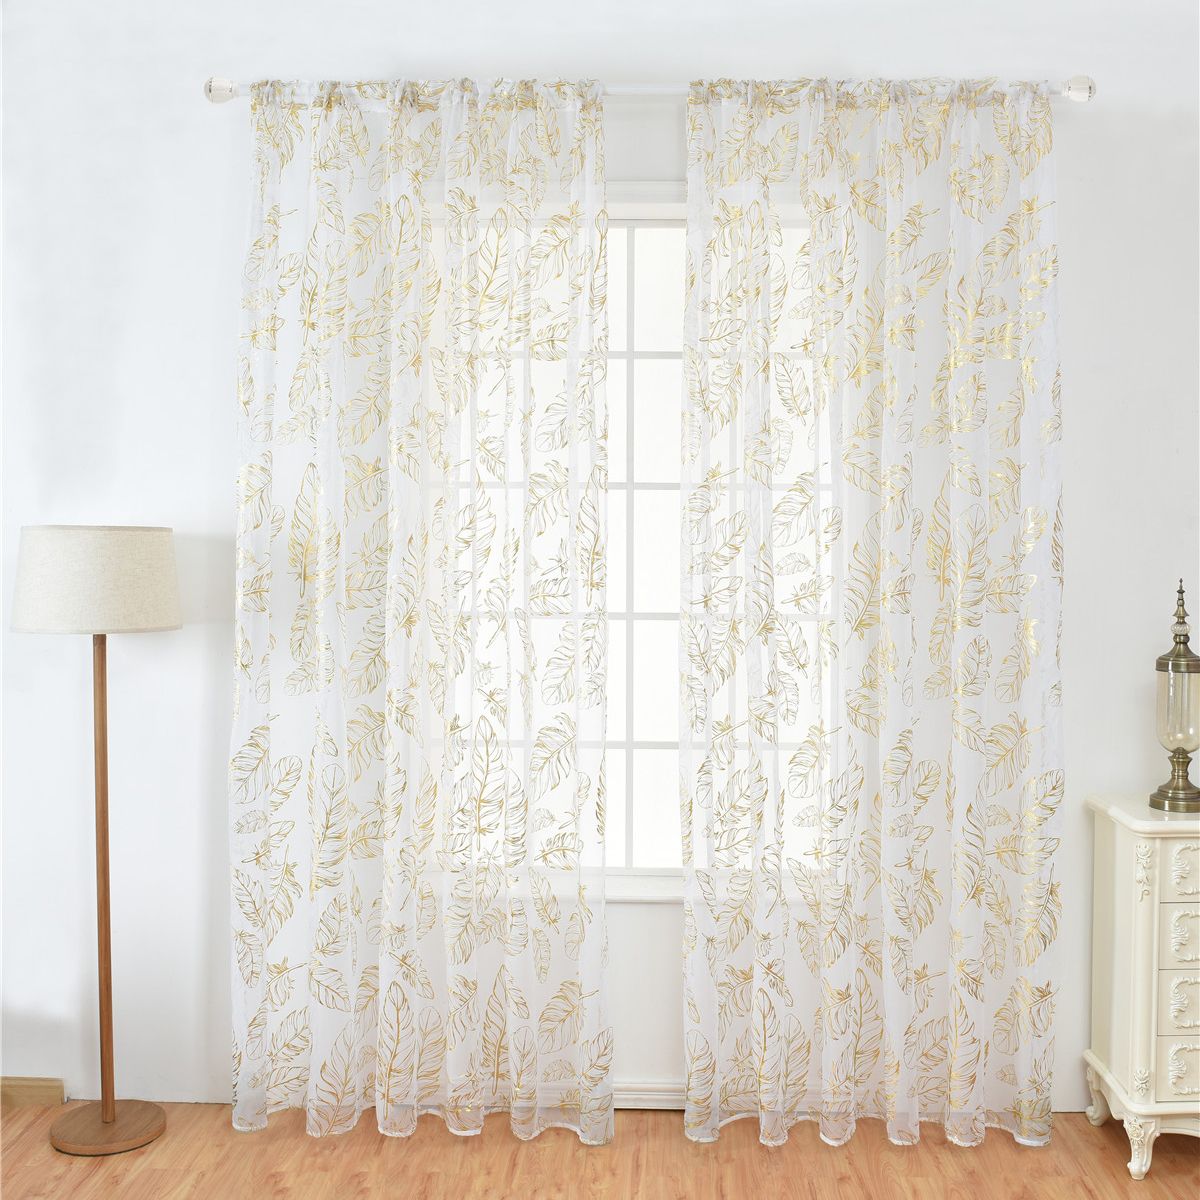 100x200cm Gold Silver Feather Sheer Curtains Window Door Yarn Tulle Voile For Living Room Bedroom Home Hotel Decor Rod Pocket Curtain Panel Curtain Plastic Curtains From Ddp2020